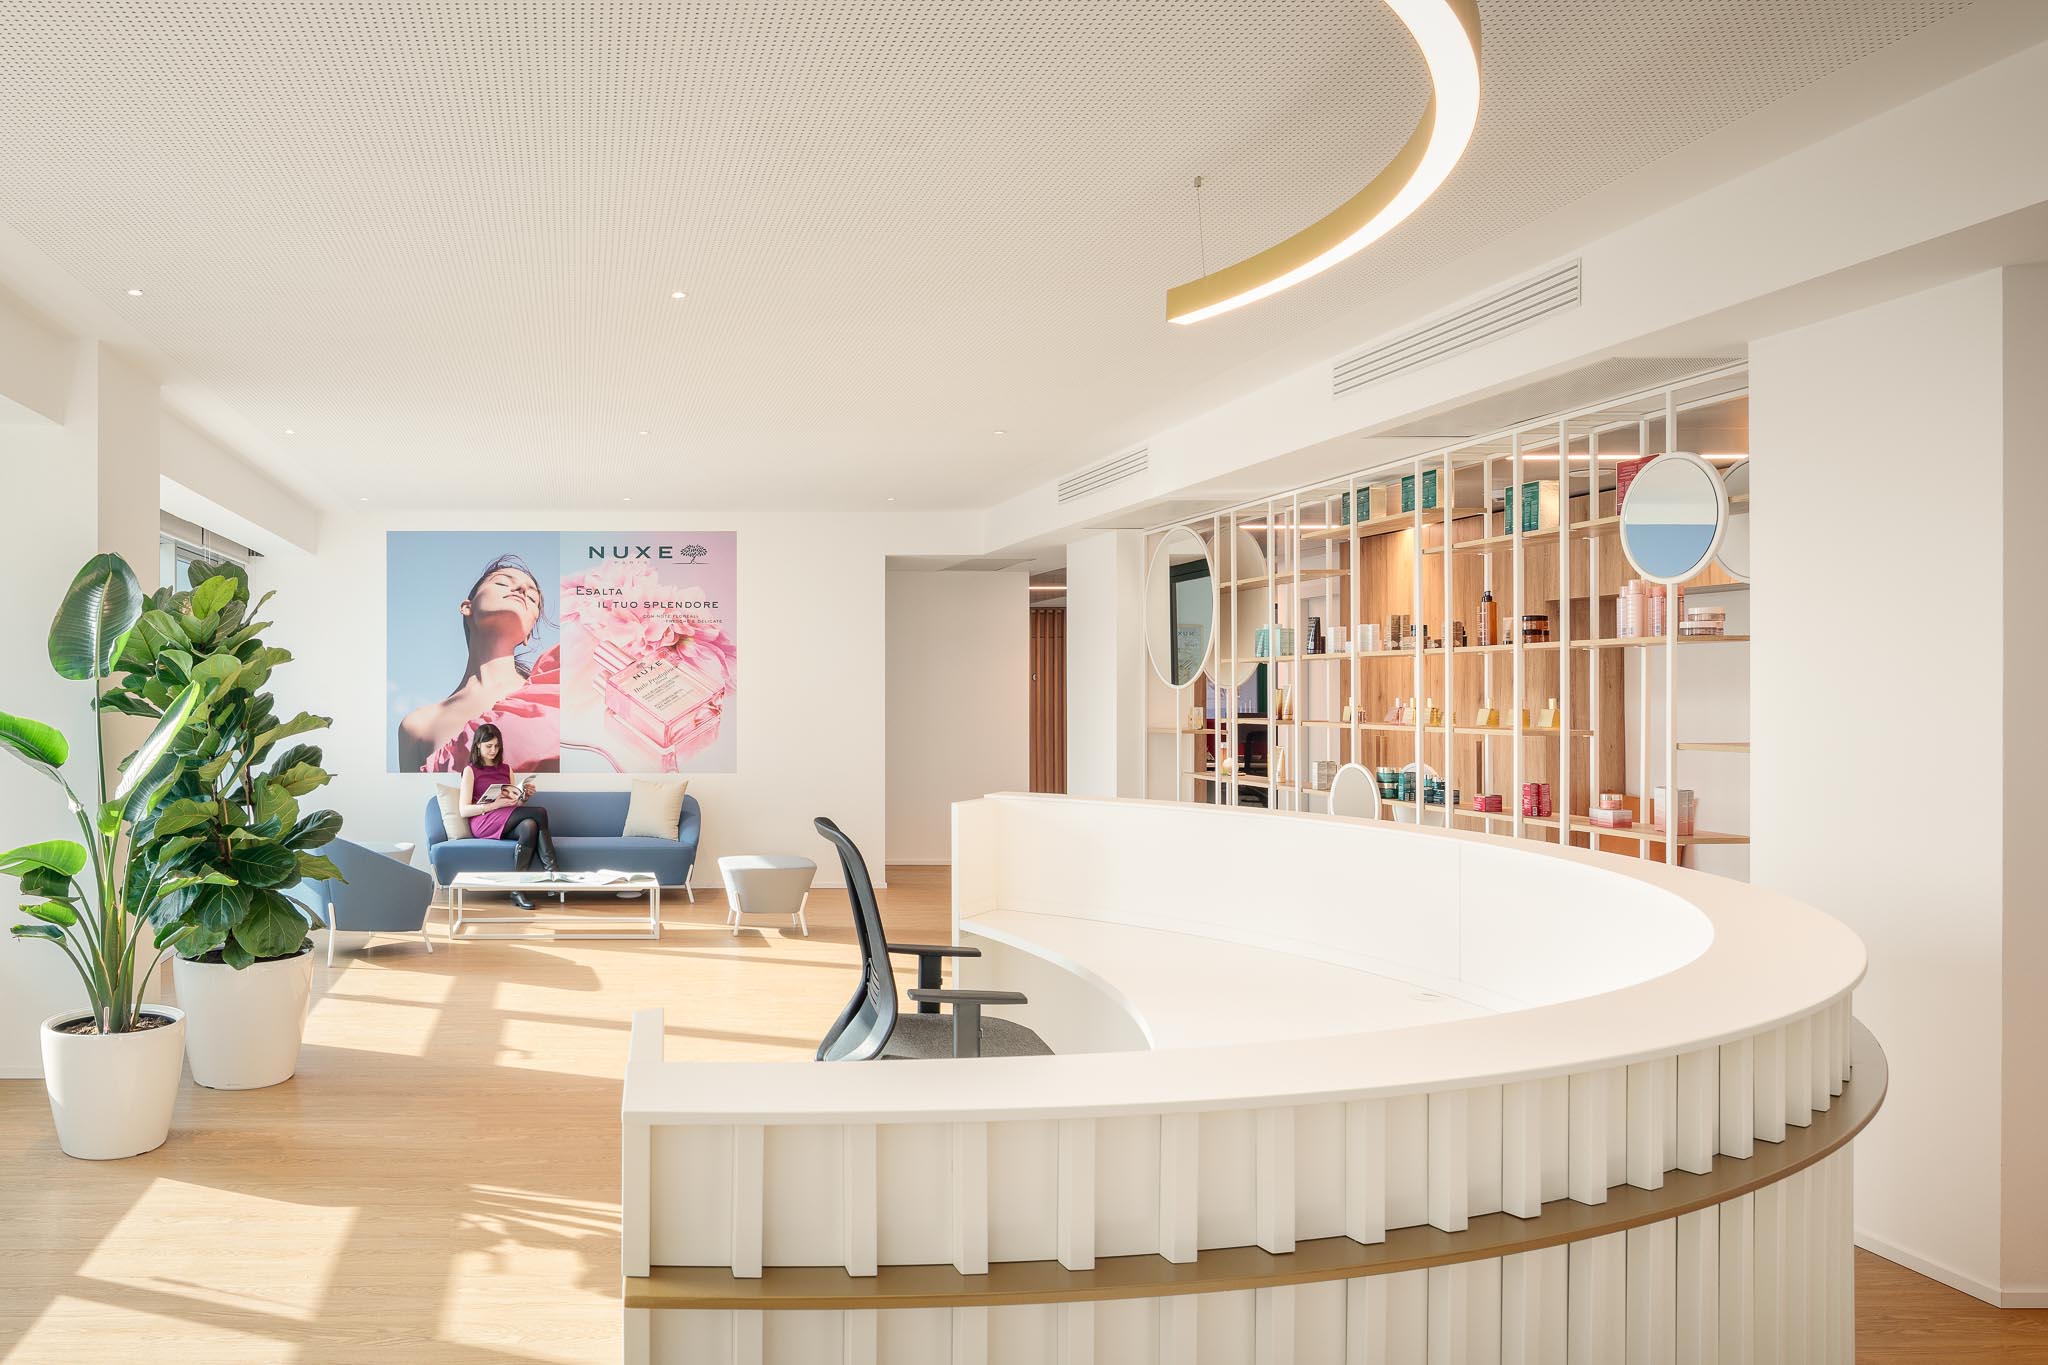 Organic curved shapes at the Nuxe Laboratoires offices in Milan, Italy